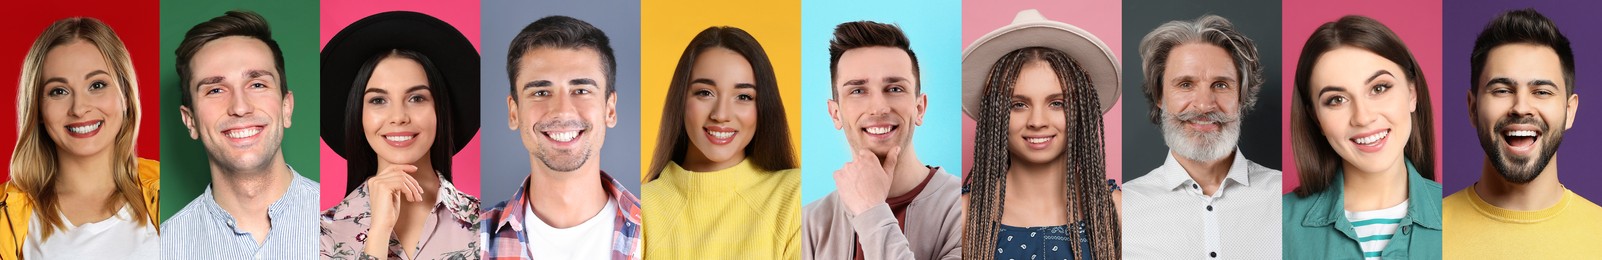 Image of Set with portraits of happy people on different color backgrounds